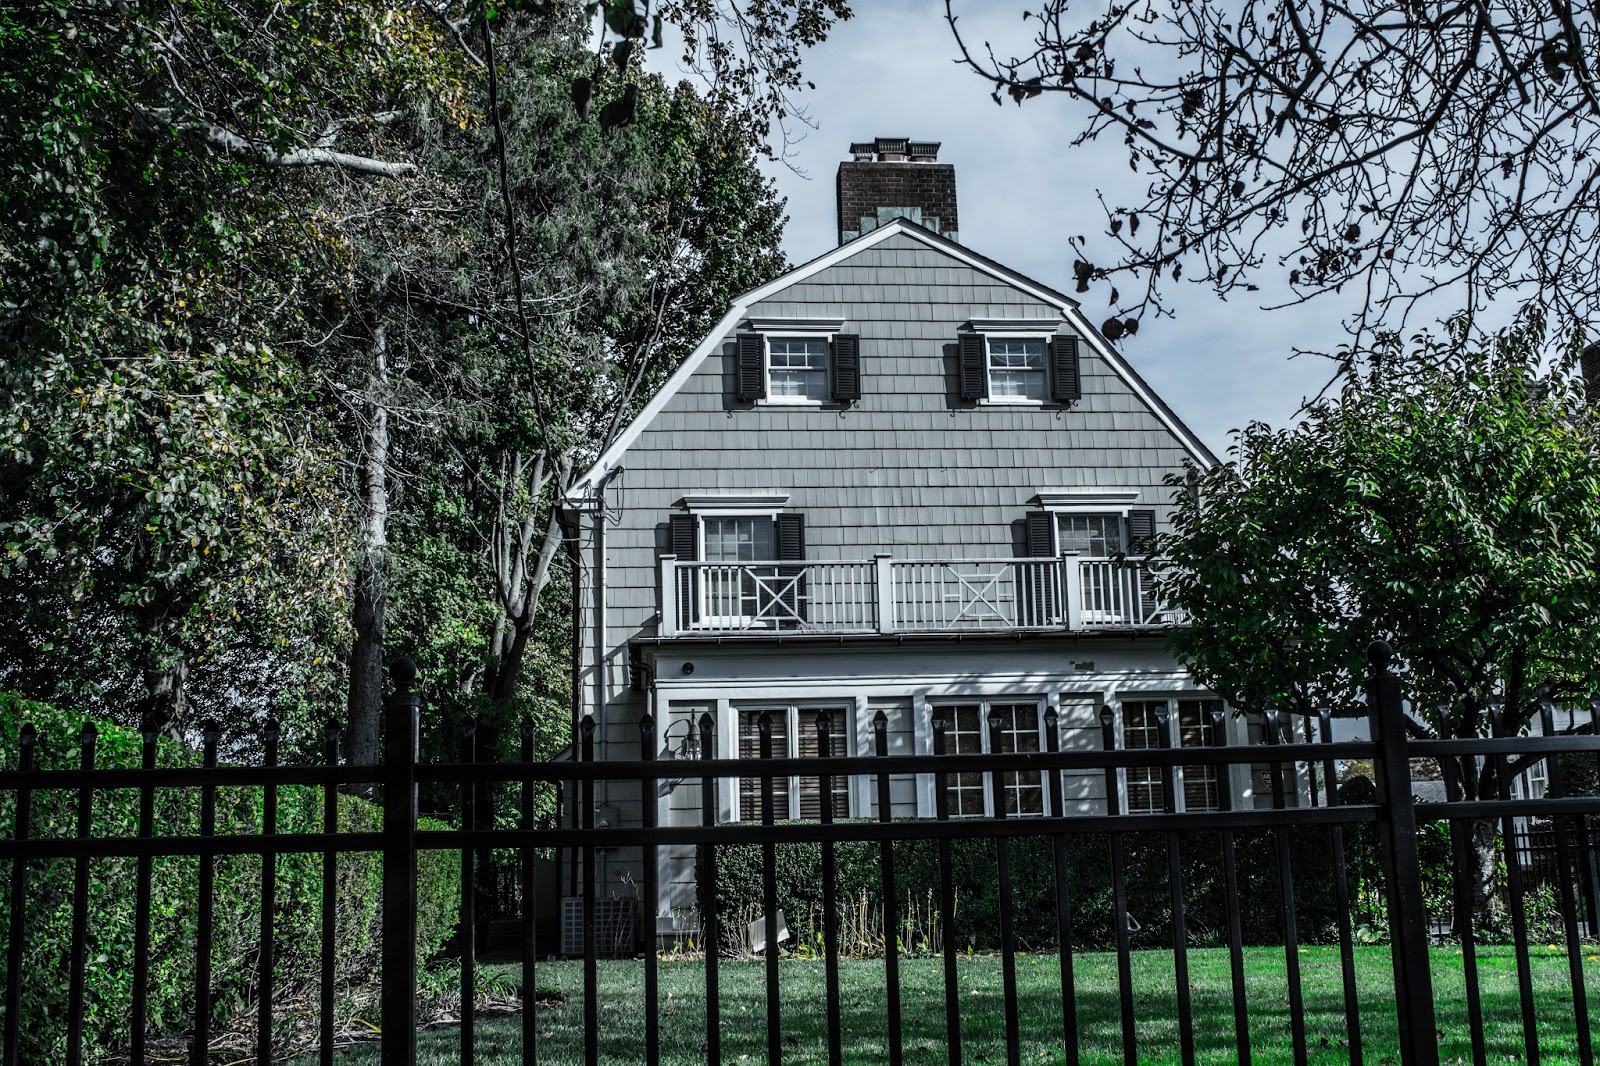 Awesome Movie Locations: The Amityville Horror